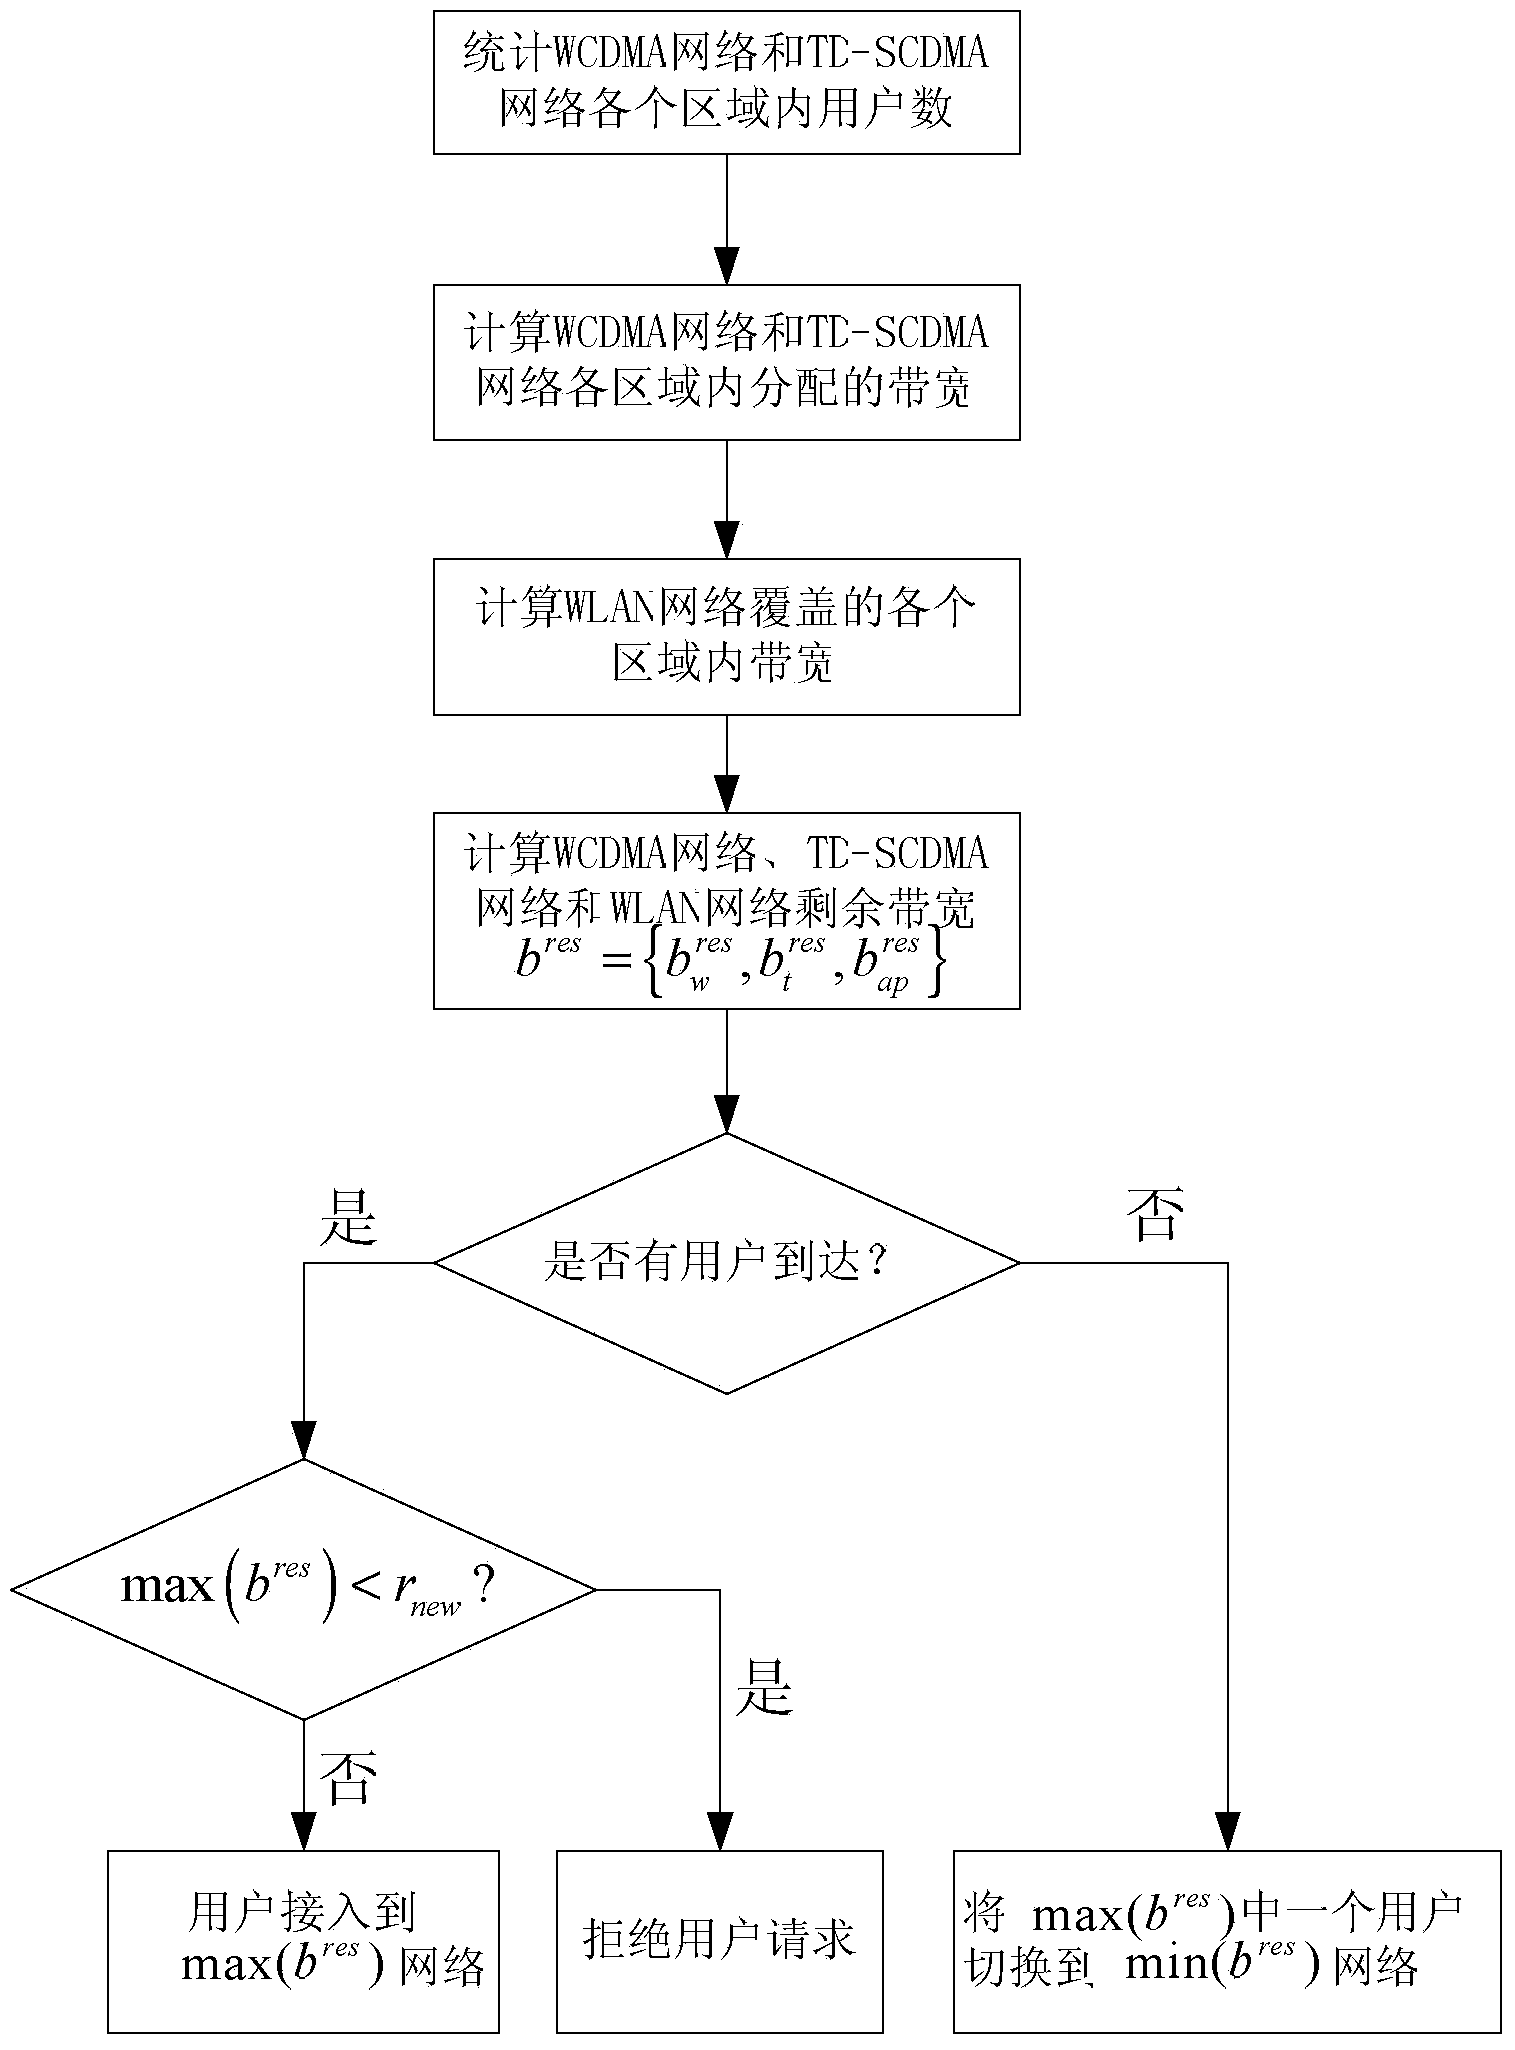 Non-cooperation game resource allocating-based 3G (the third generation telecommunication) / WLAN (wireless local area network) heterogeneous network accessing control method